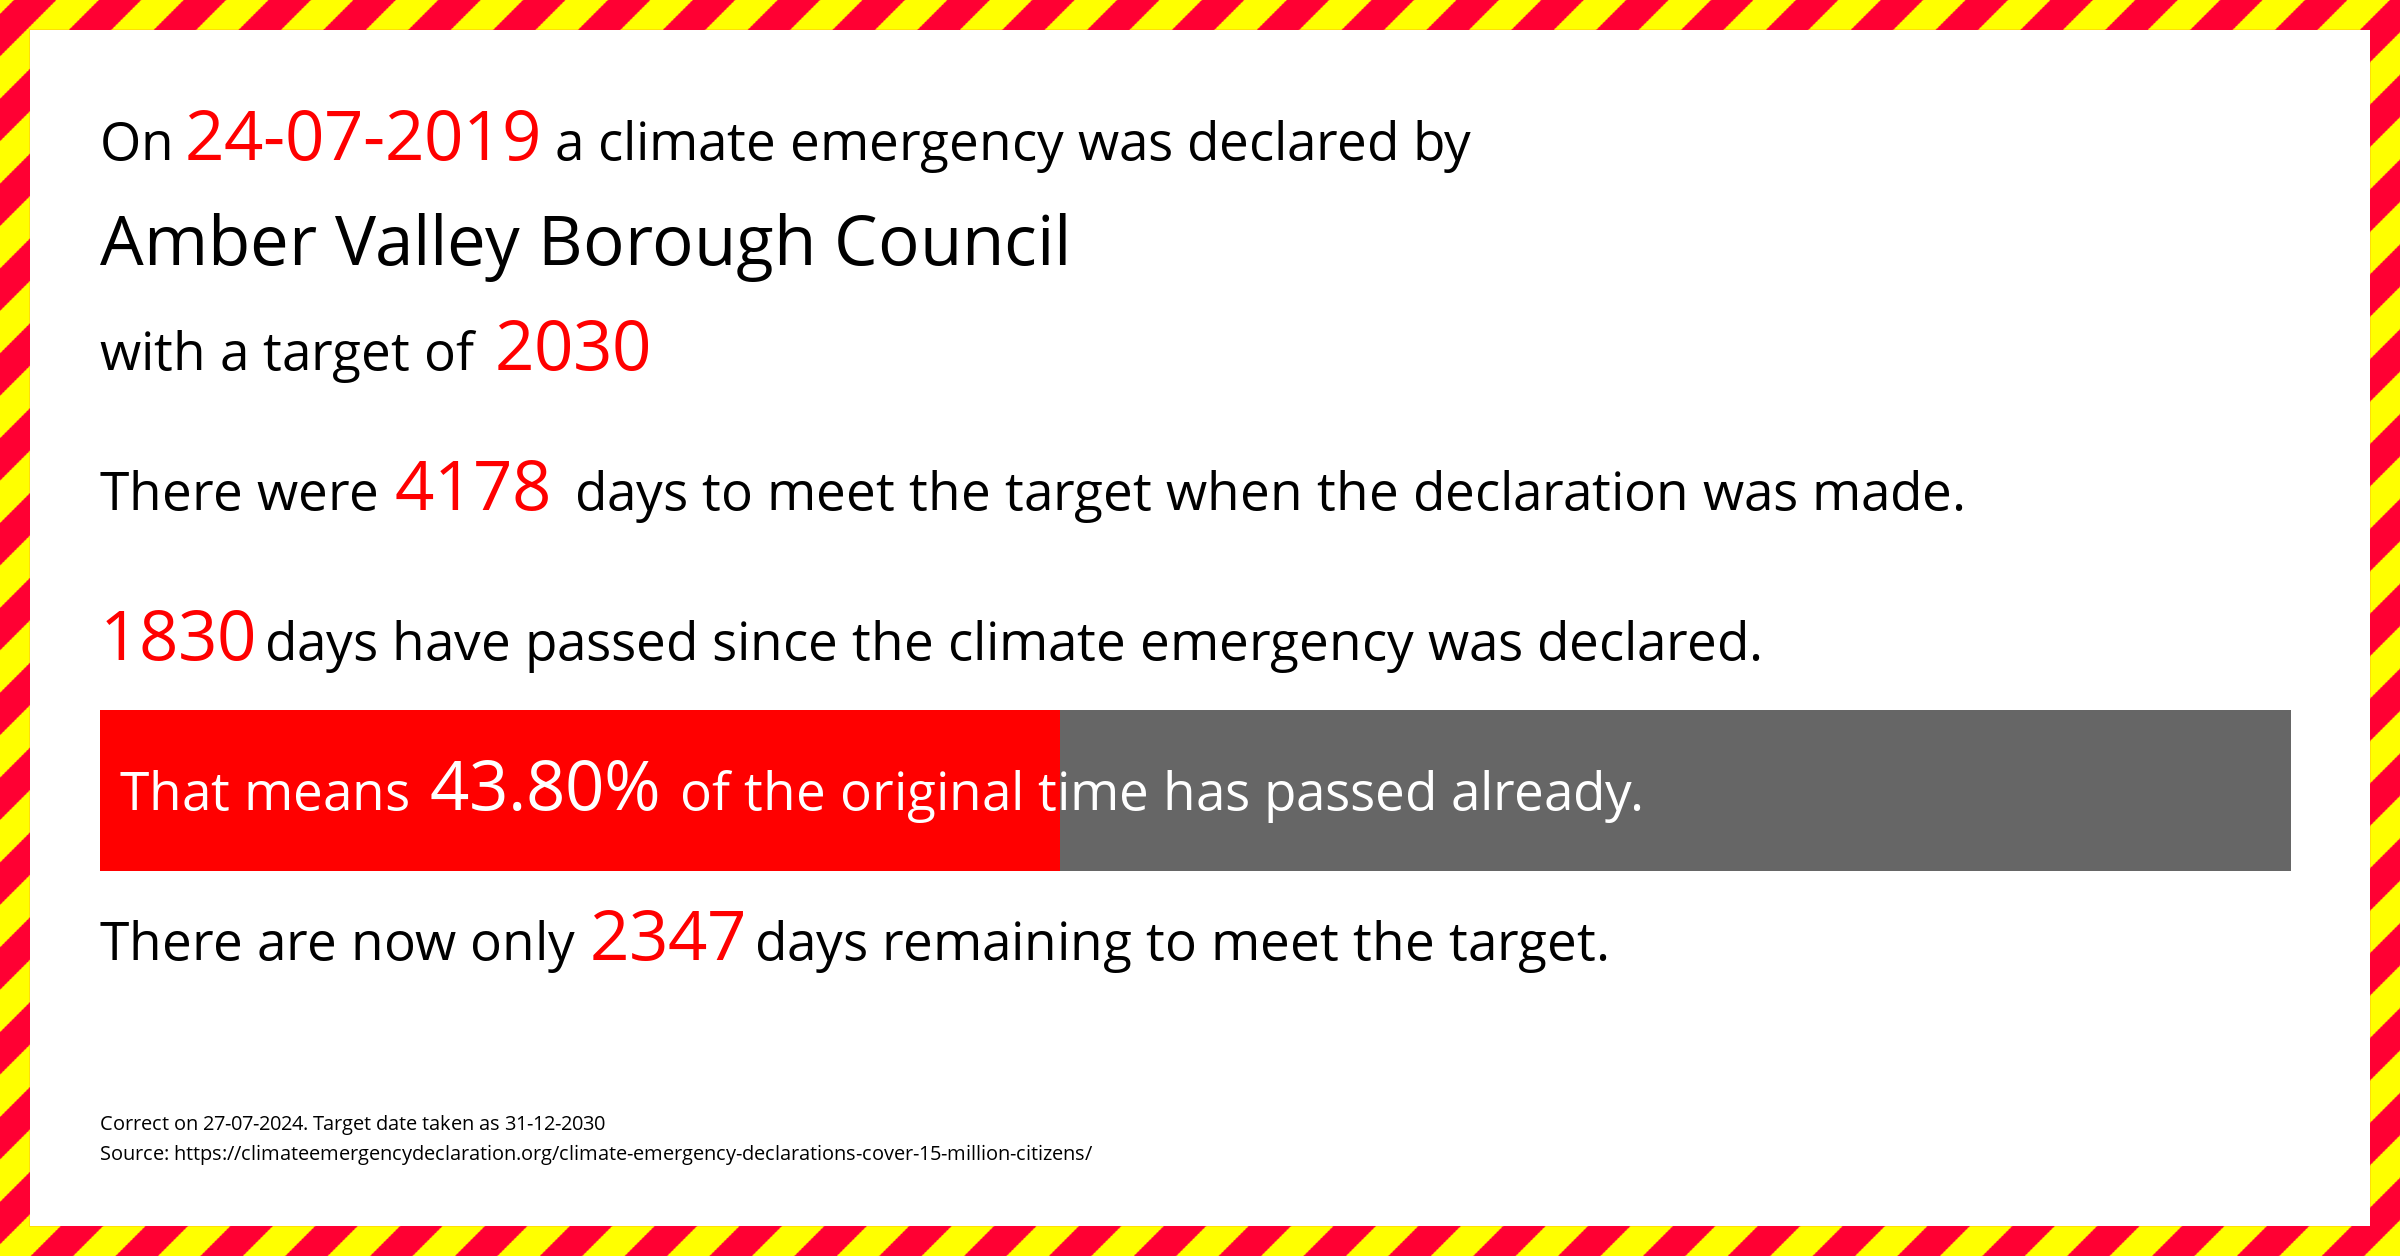 Amber Valley Borough Council declared a Climate emergency on Wednesday 24th July 2019, with a target of 2030.